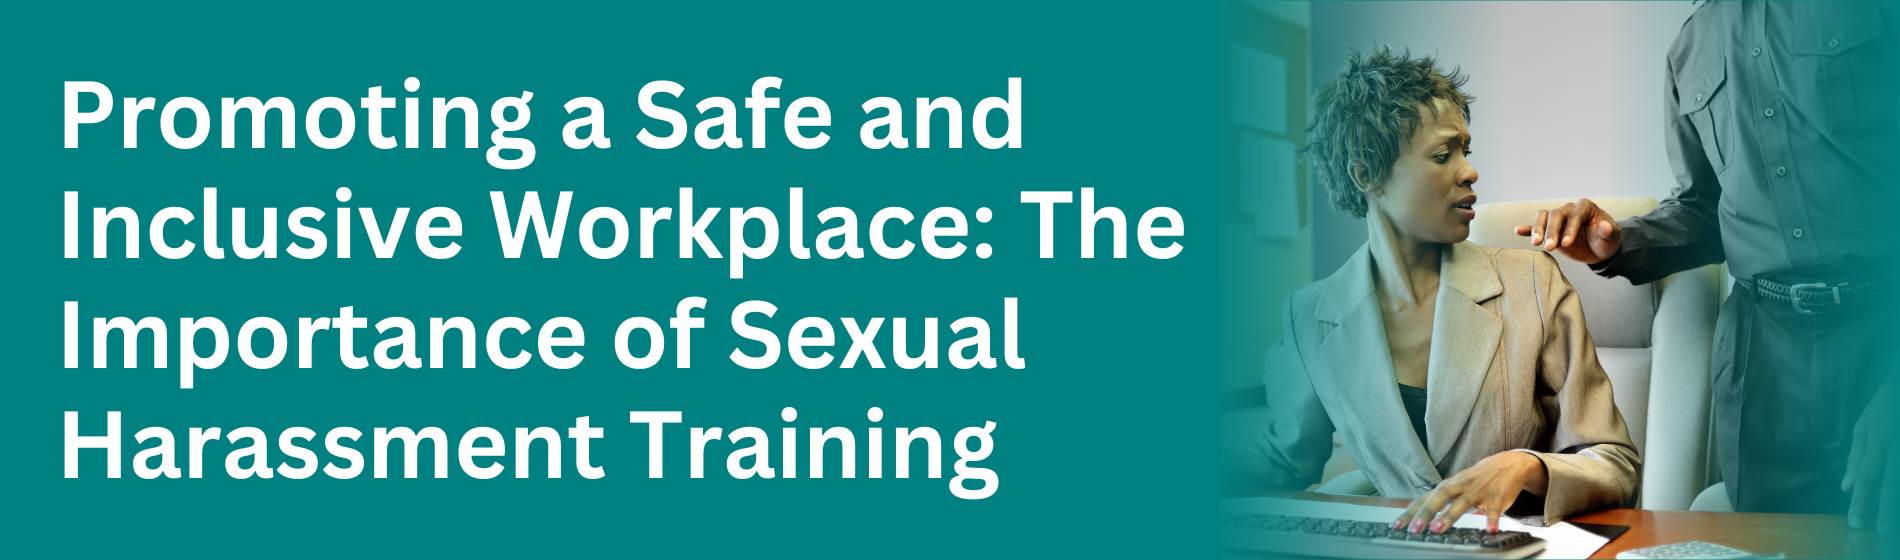 Promoting A Safe And Inclusive Workplace The Importance Of Sexual Harassment Training